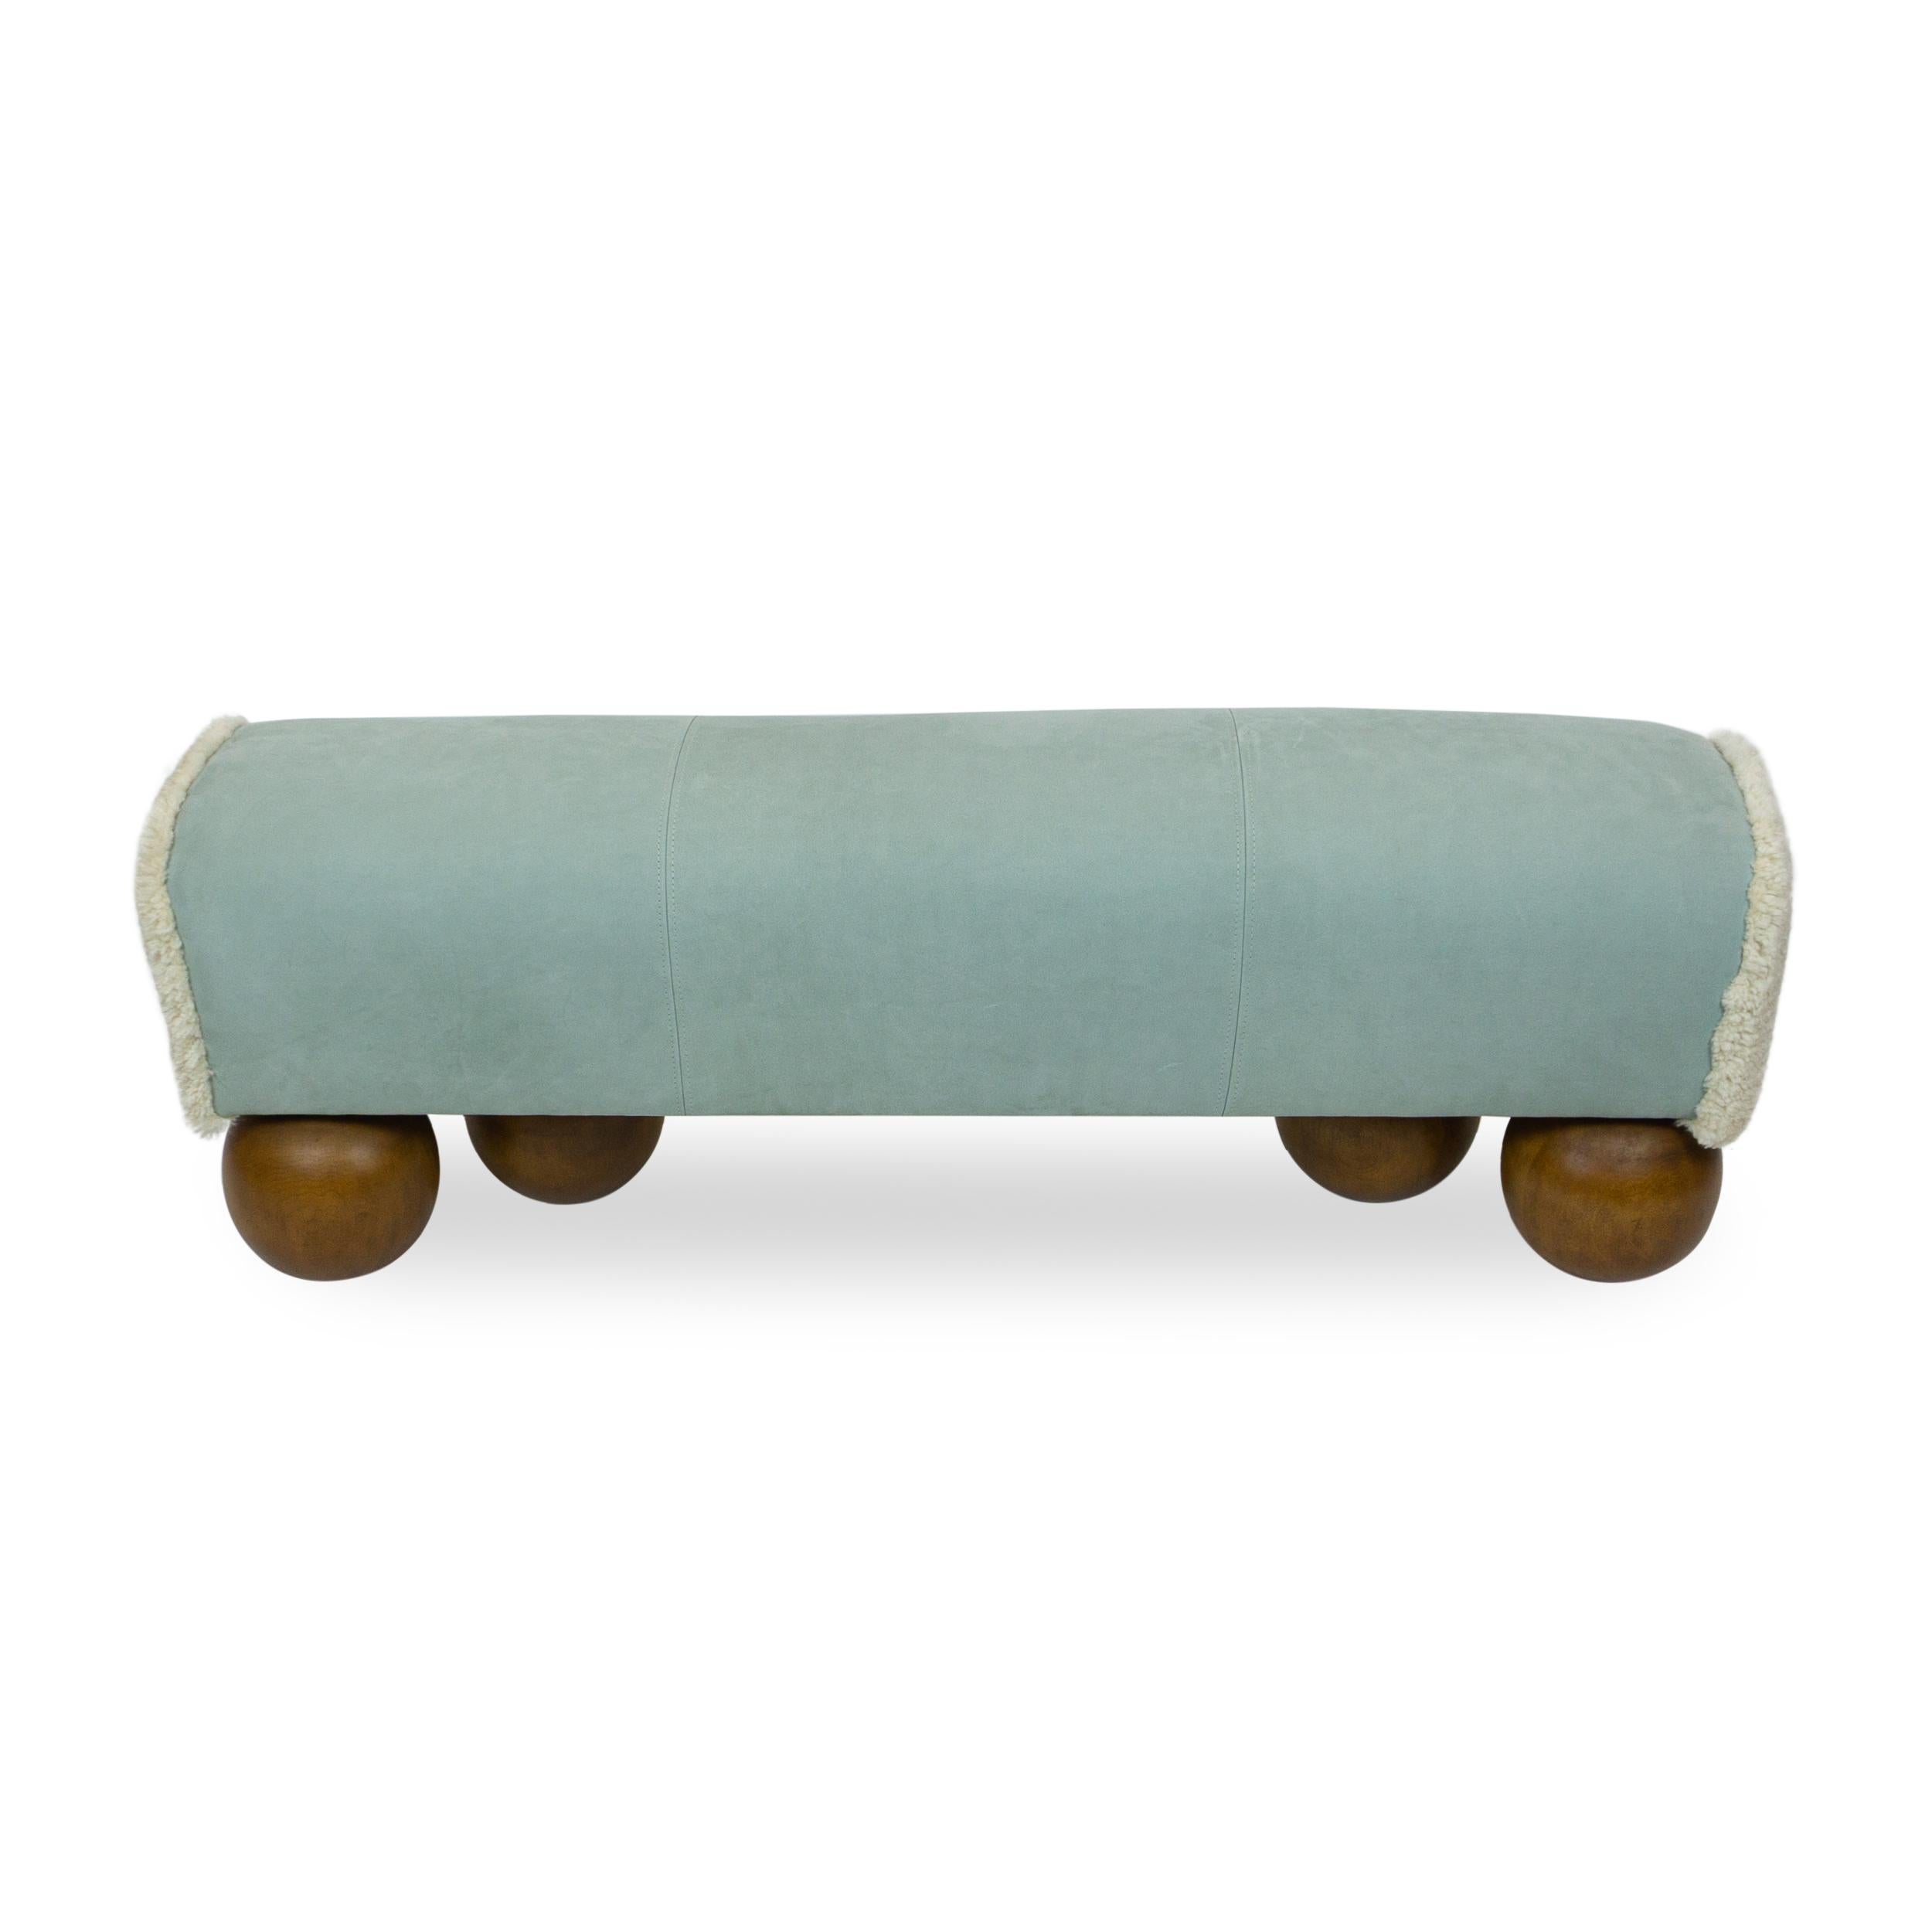 Hand-Crafted Walnut Ball Foot Bench with Leather Saddle Shaped Seat, Customizable For Sale